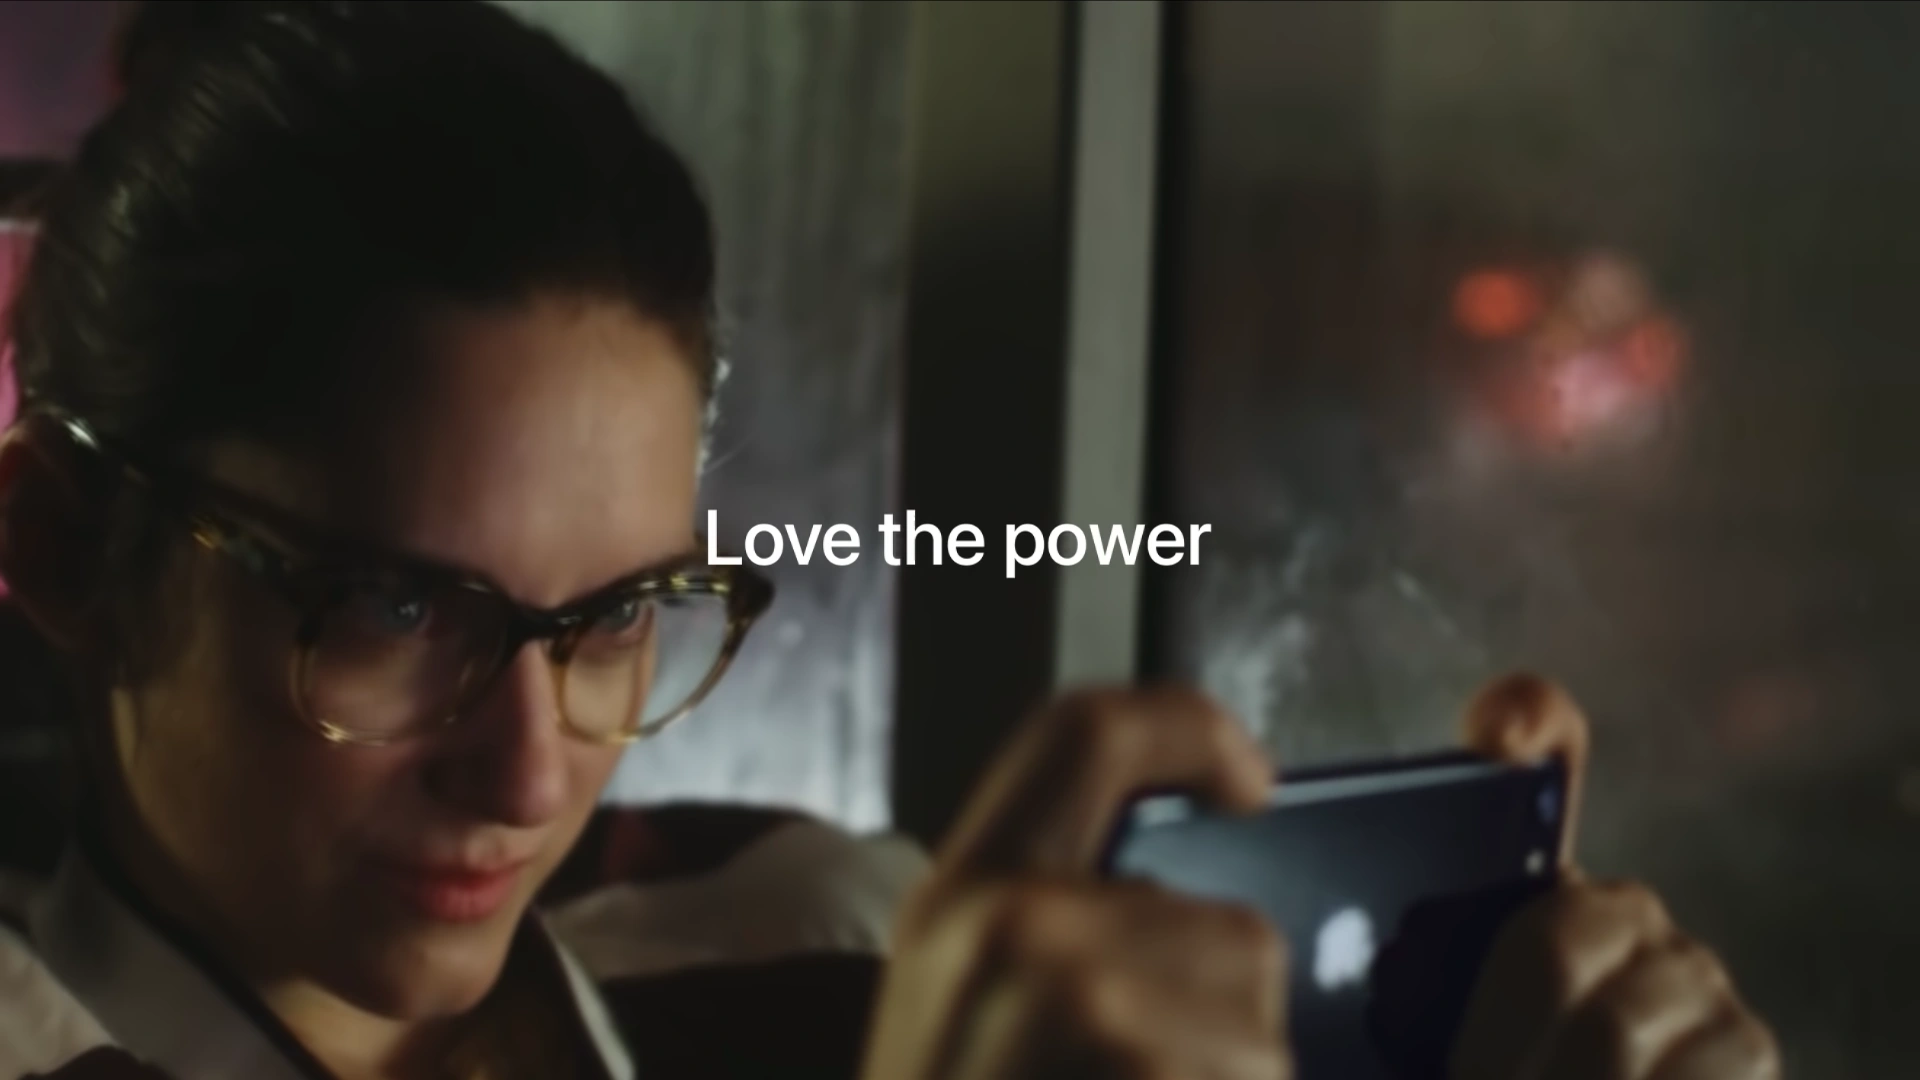 A still from Apple's video commercial showing a woman holding the third-generation iPhone SE in her hands in landscape orientation, looking intently at the screen, with the tagline "Love the Power" printed in white text